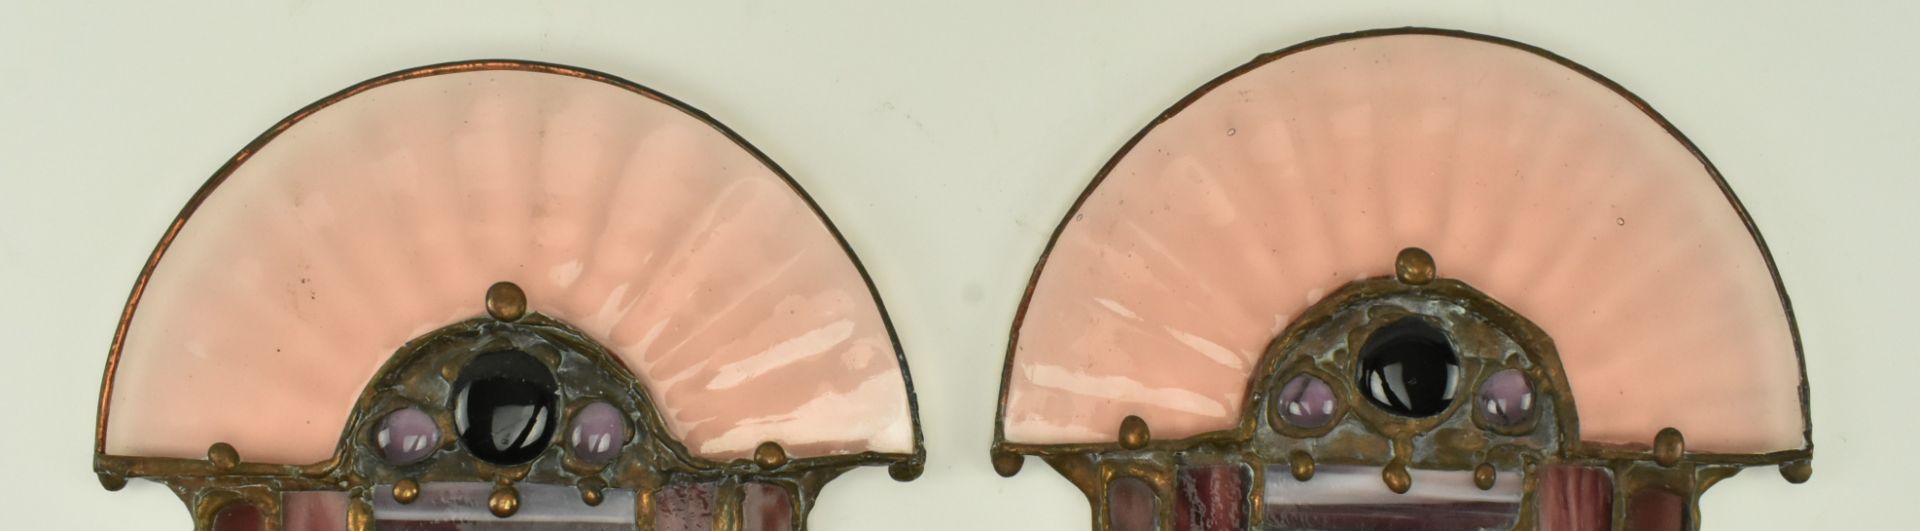 JOHN LEATHWOOD - PAIR OF STAINED LEADED GLASS WALL SCONCES - Image 2 of 8